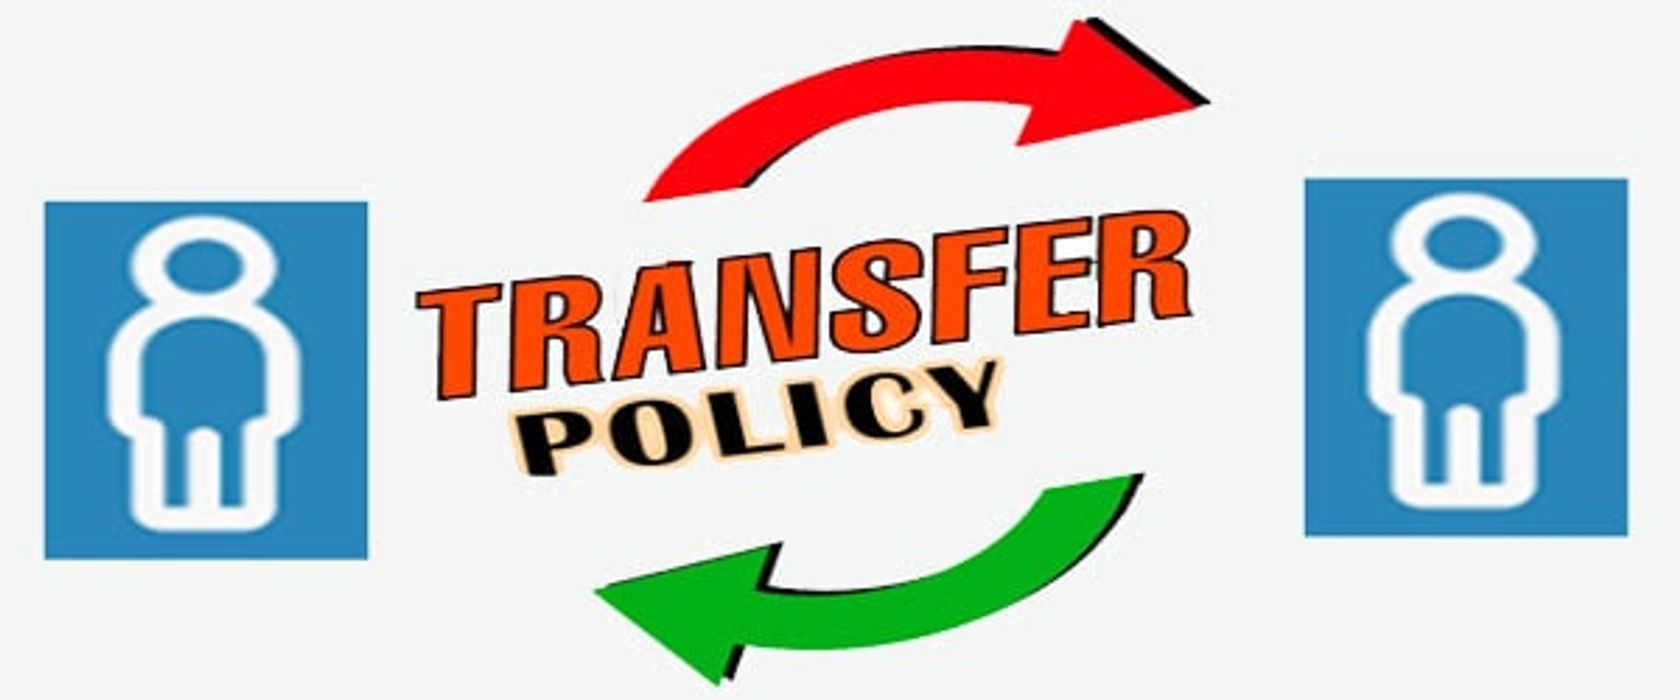 Comprehensive Transfer Policy - Eligibility service condition for Non-Gazetted Employees on IRRT: Railway Board